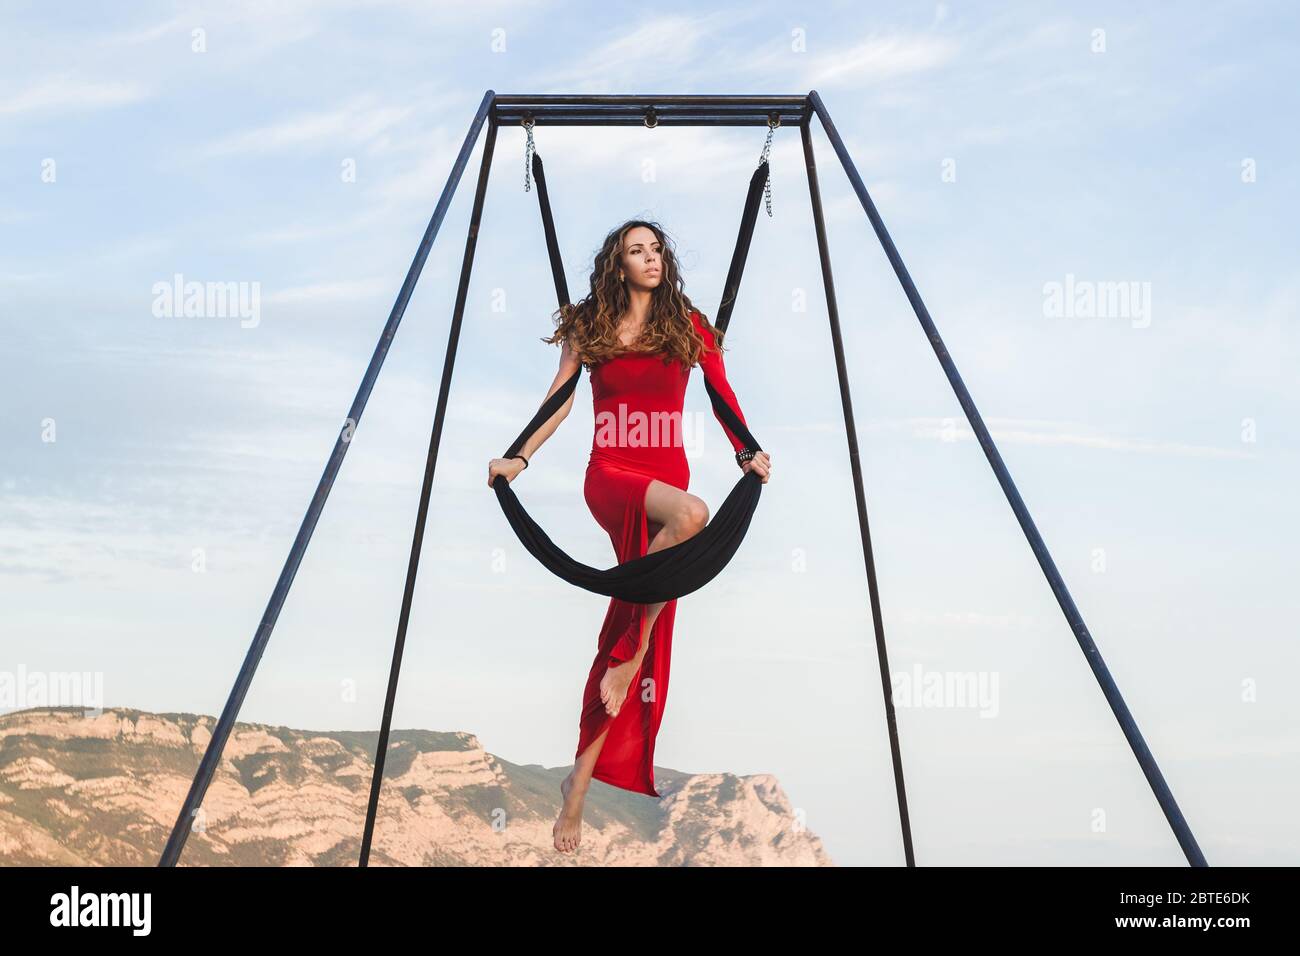 Woman in red dress practicing pole fly dance poses in a hammock outdoor with a mountain view. Female sports, wellbeing concept. Pilates outdoors. Stock Photo